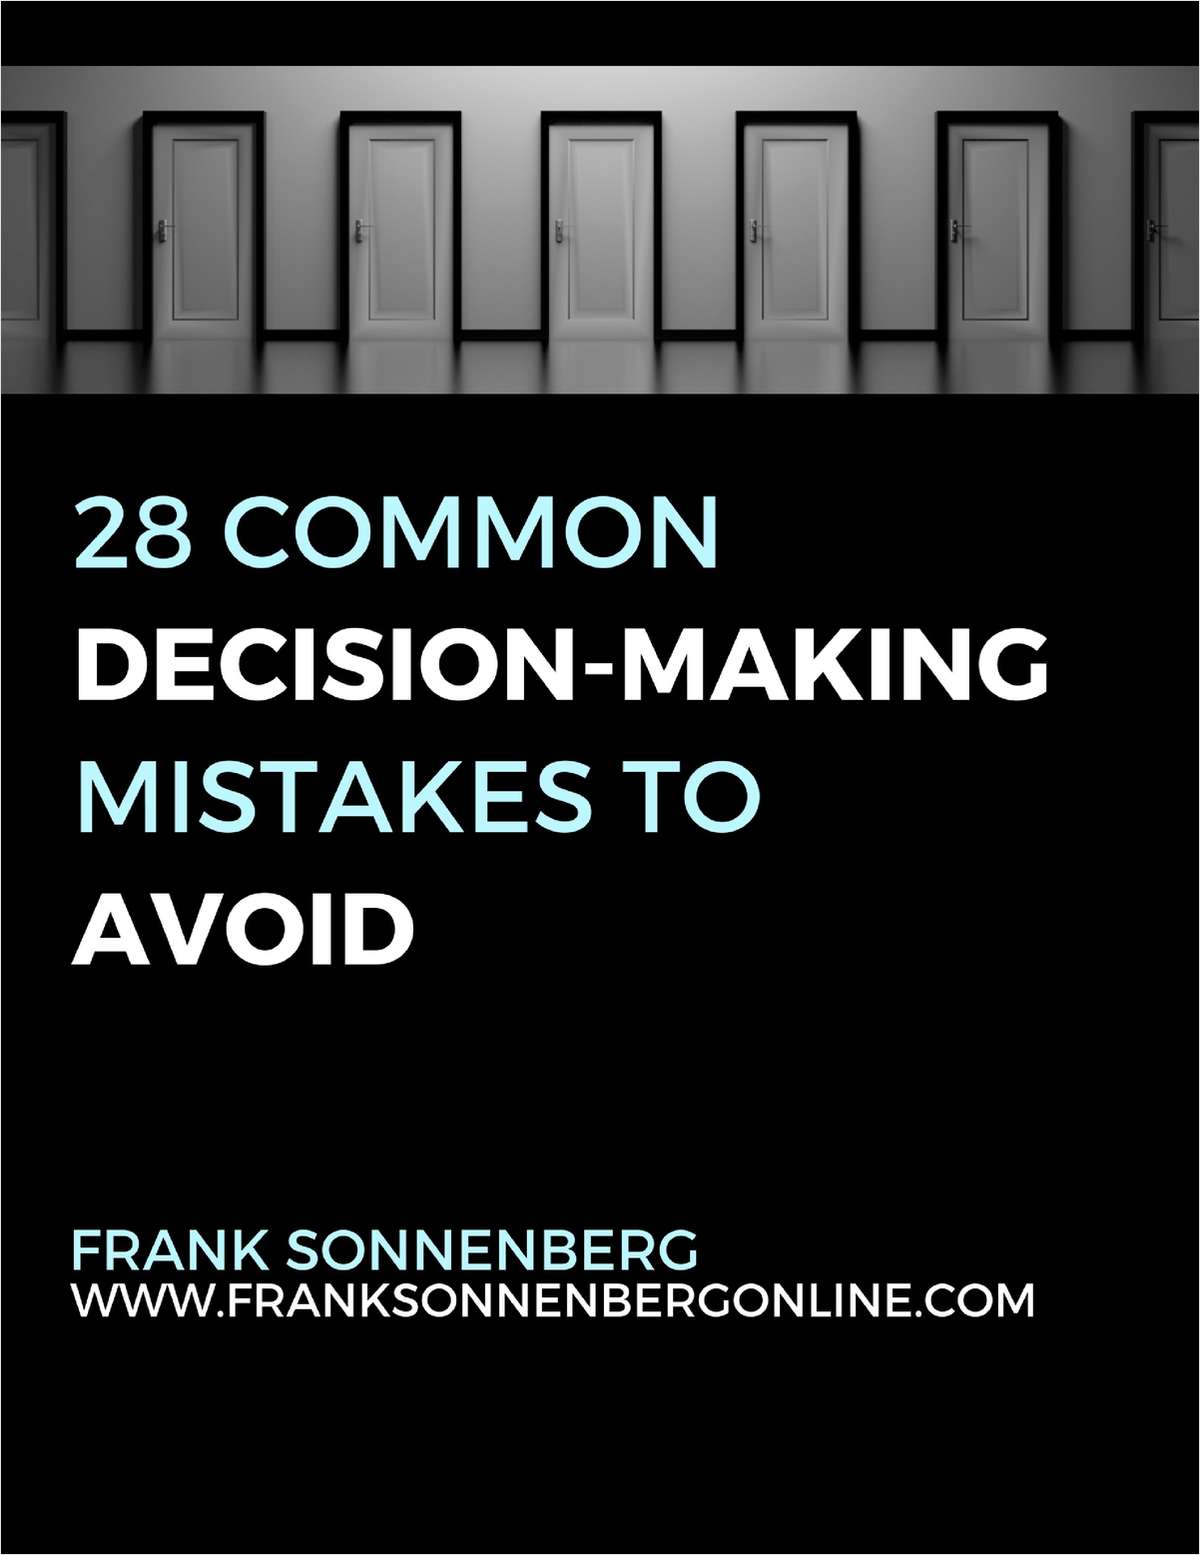 28 Common Decision-Making Mistakes to Avoid